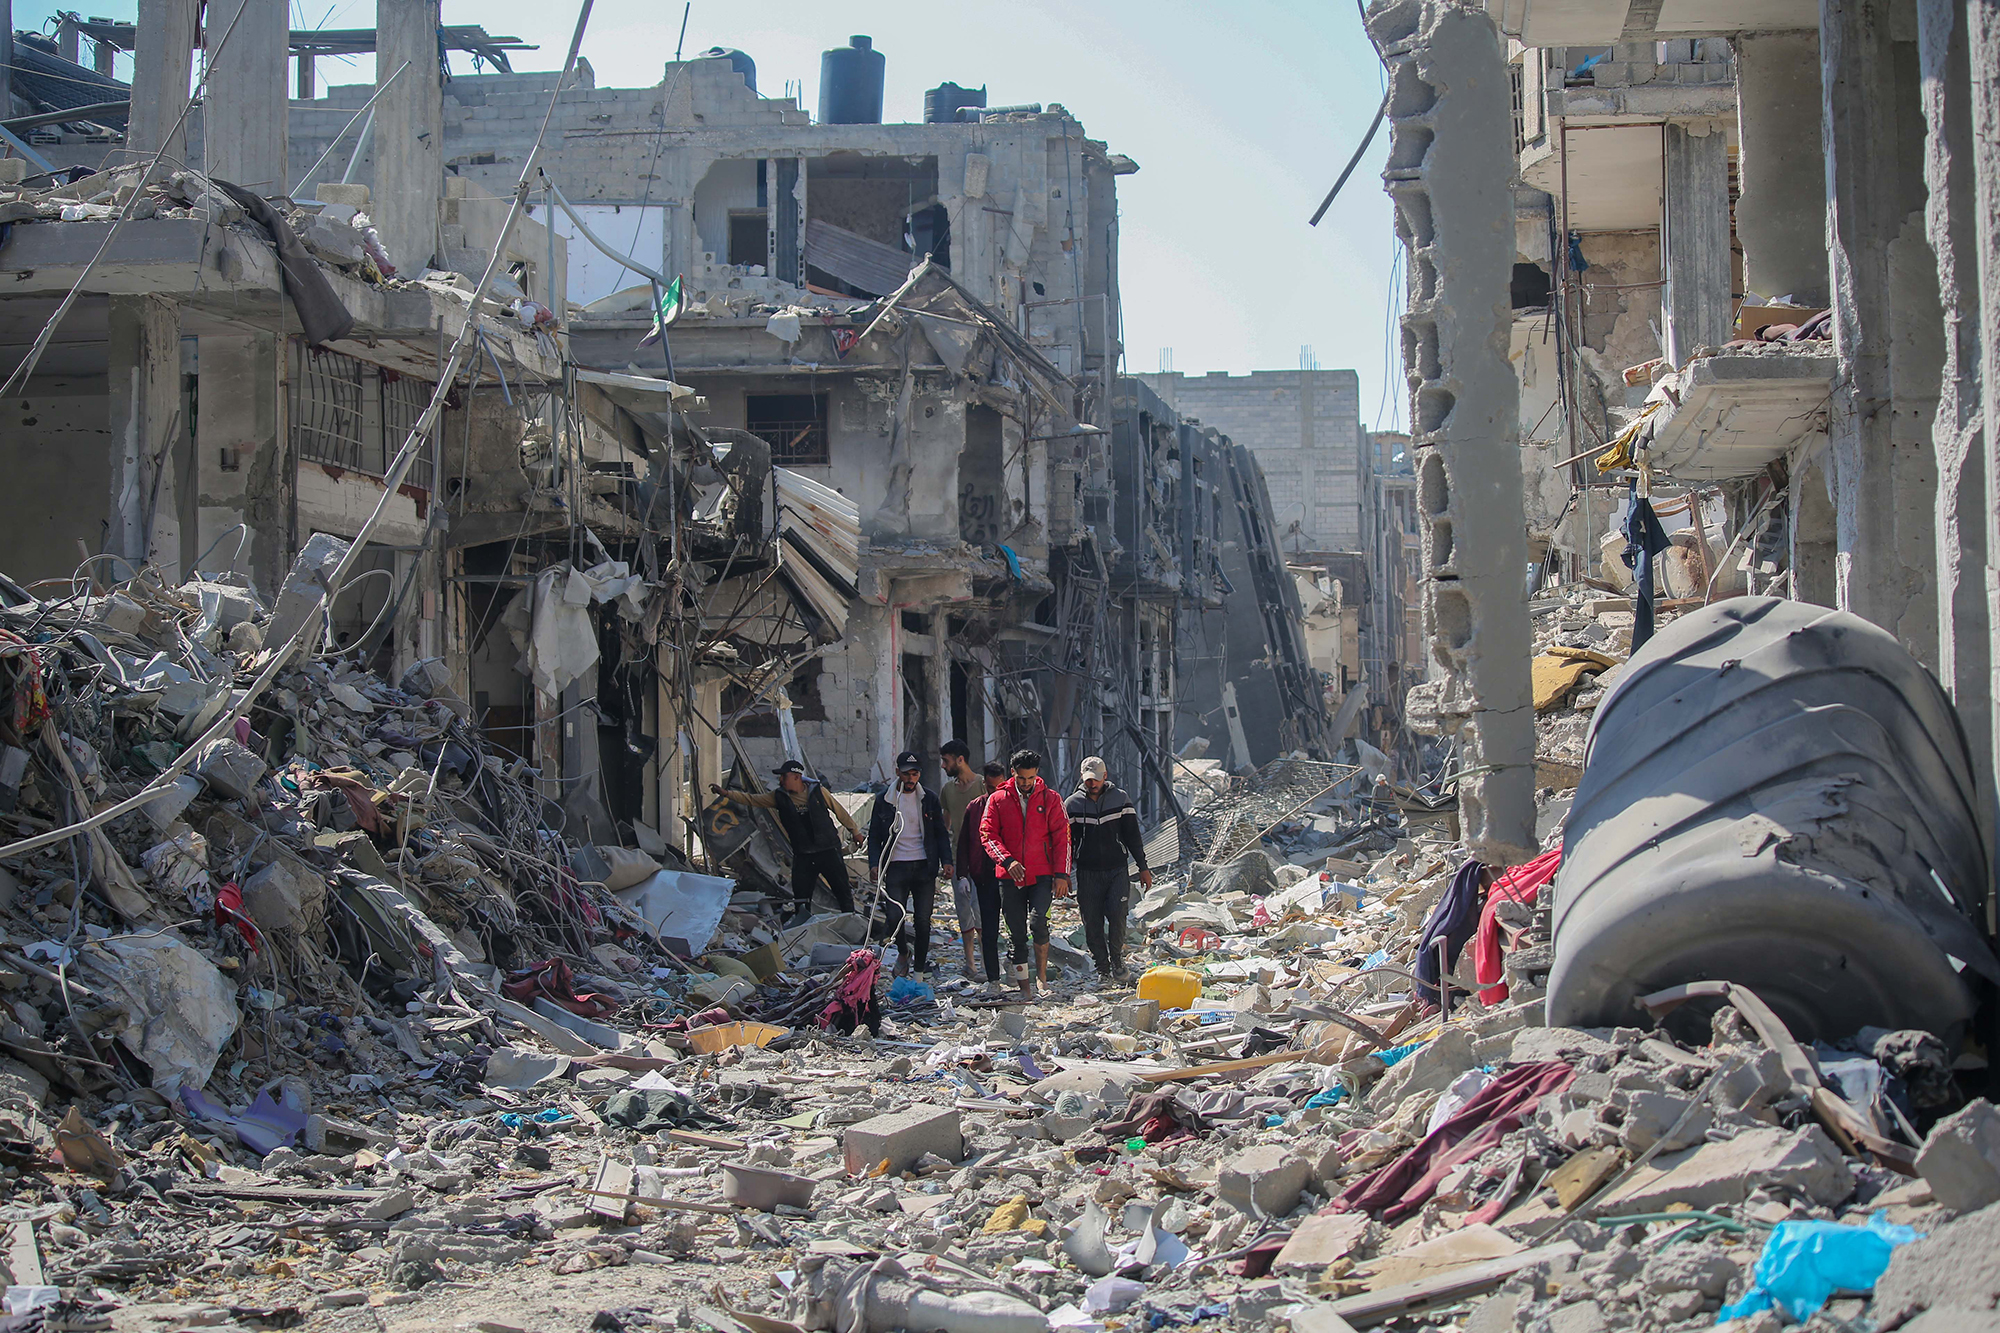 Residents inspect damage and remove items from their homes in the Gazan city of Khan Younis on April 7.